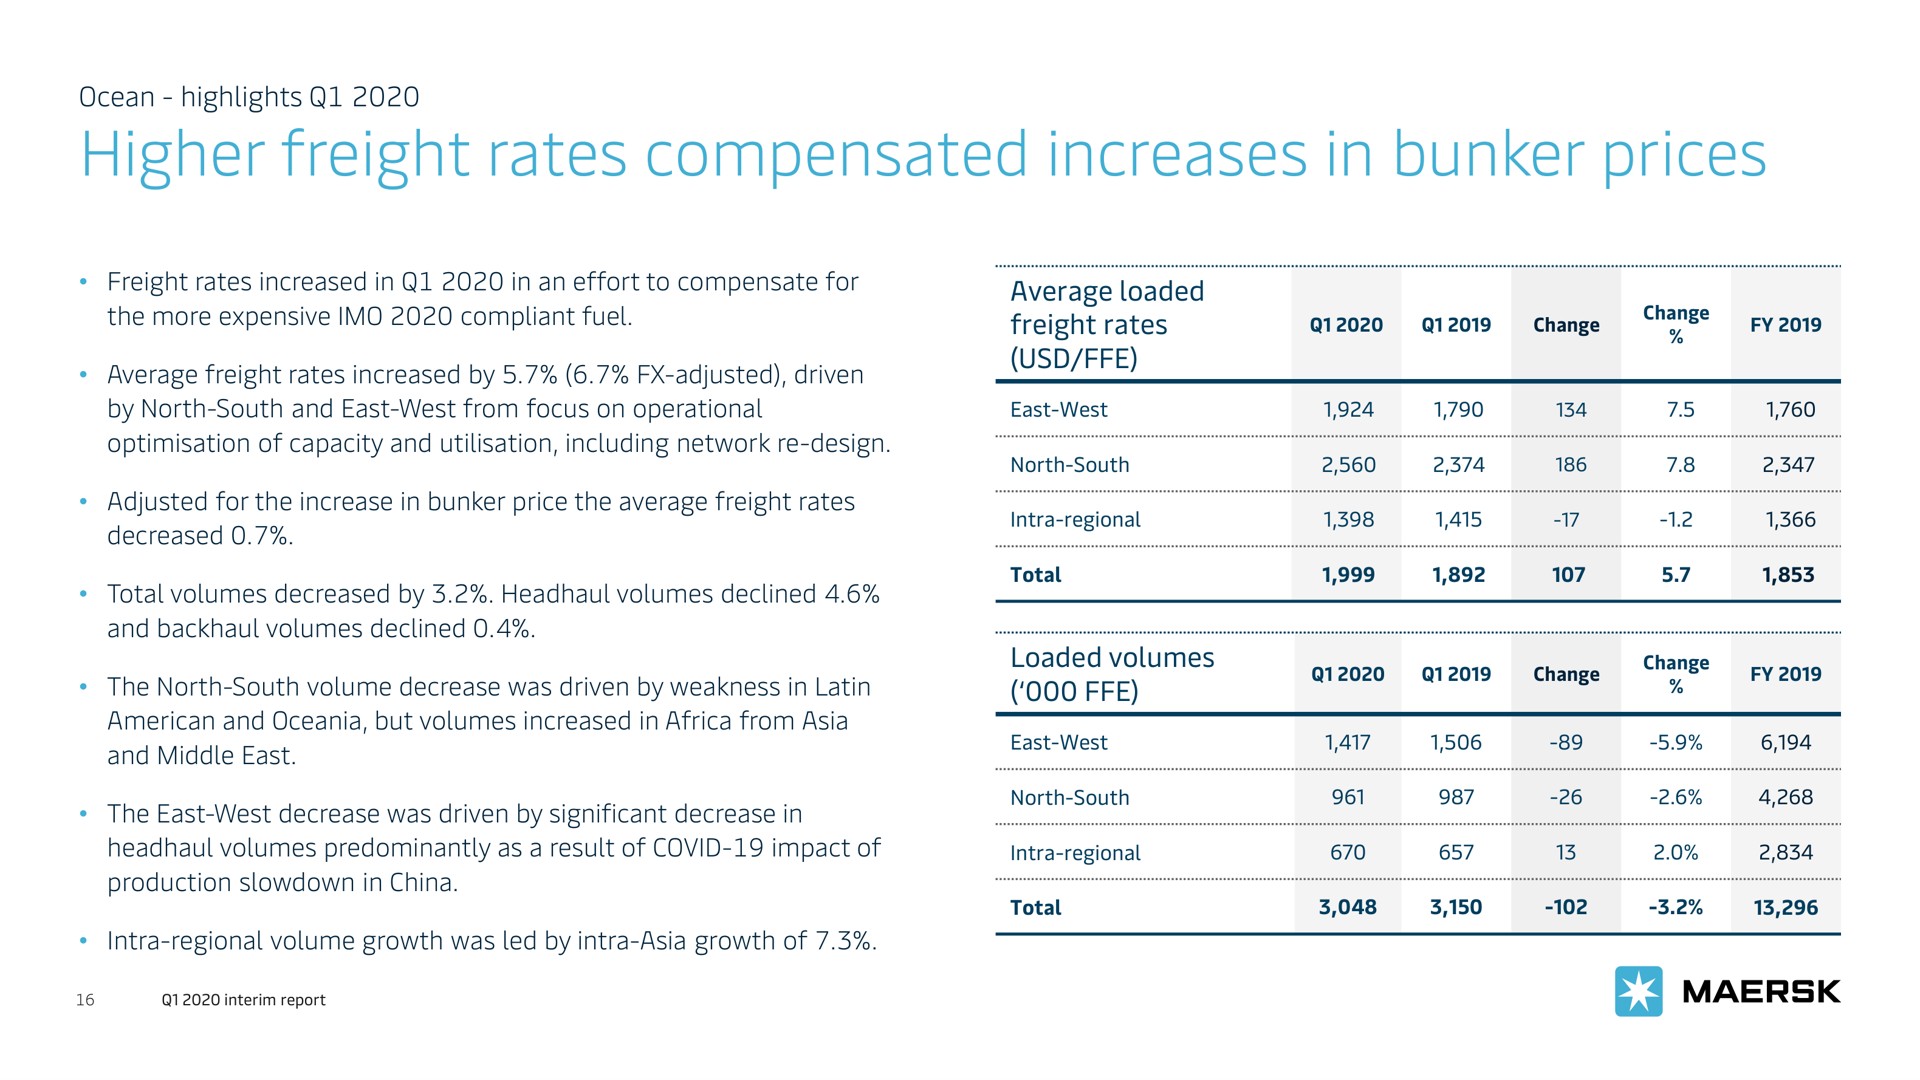 higher freight rates compensated increases in bunker prices | Maersk